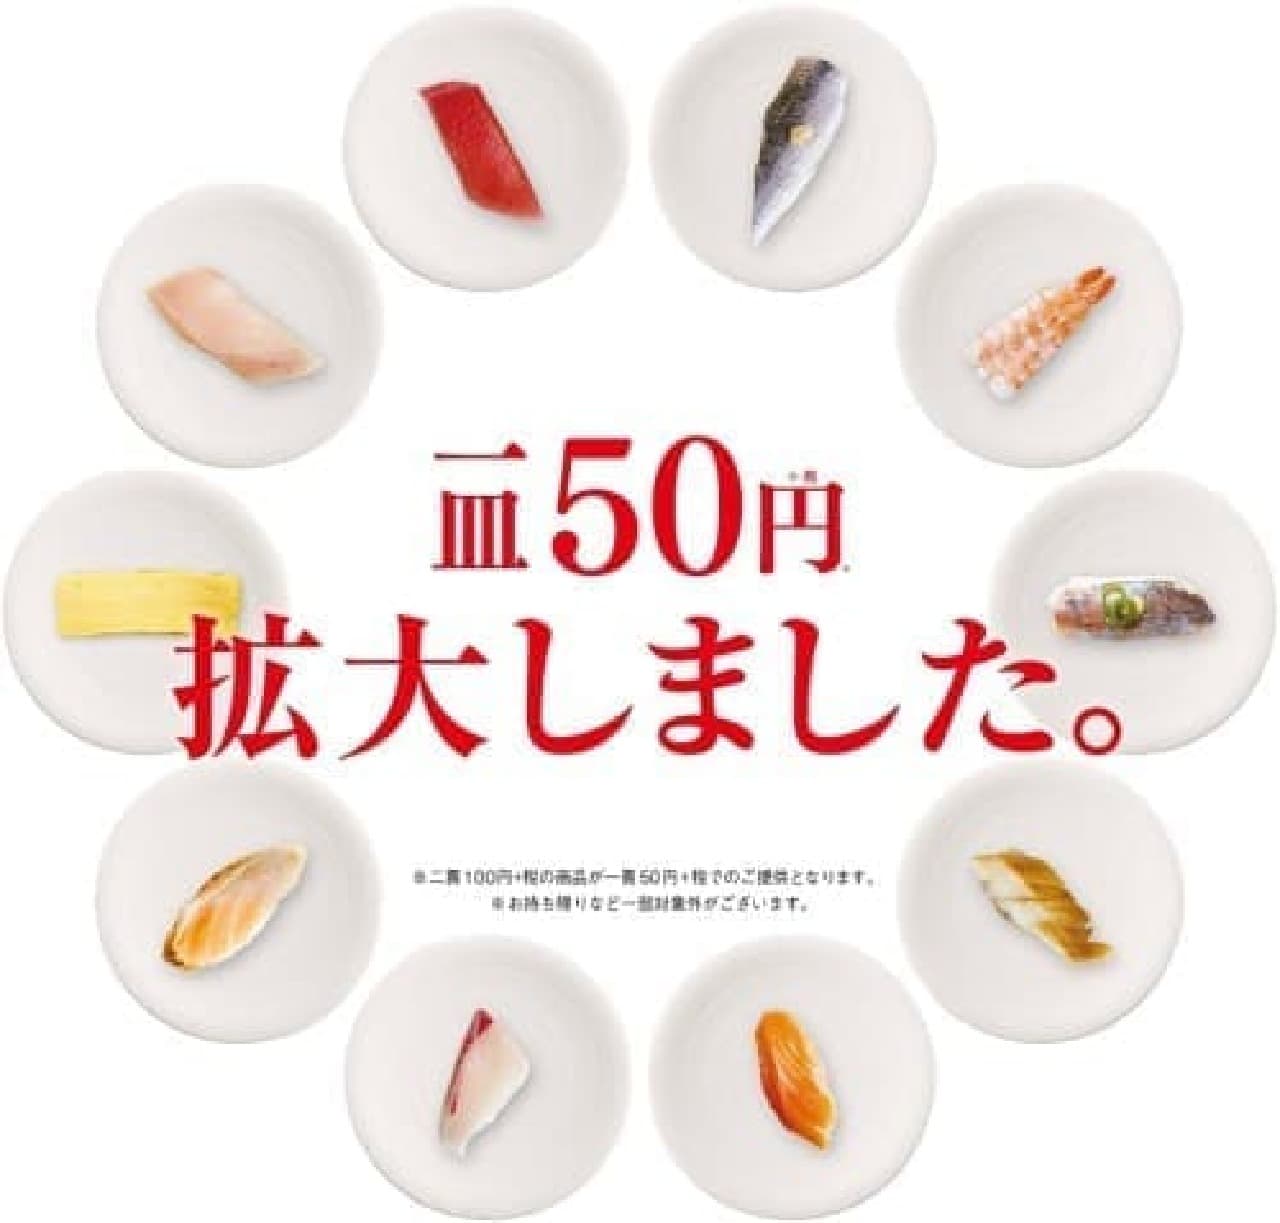 Expanded stores offering Kappa Sushi "50 yen per plate (consistent offer)"